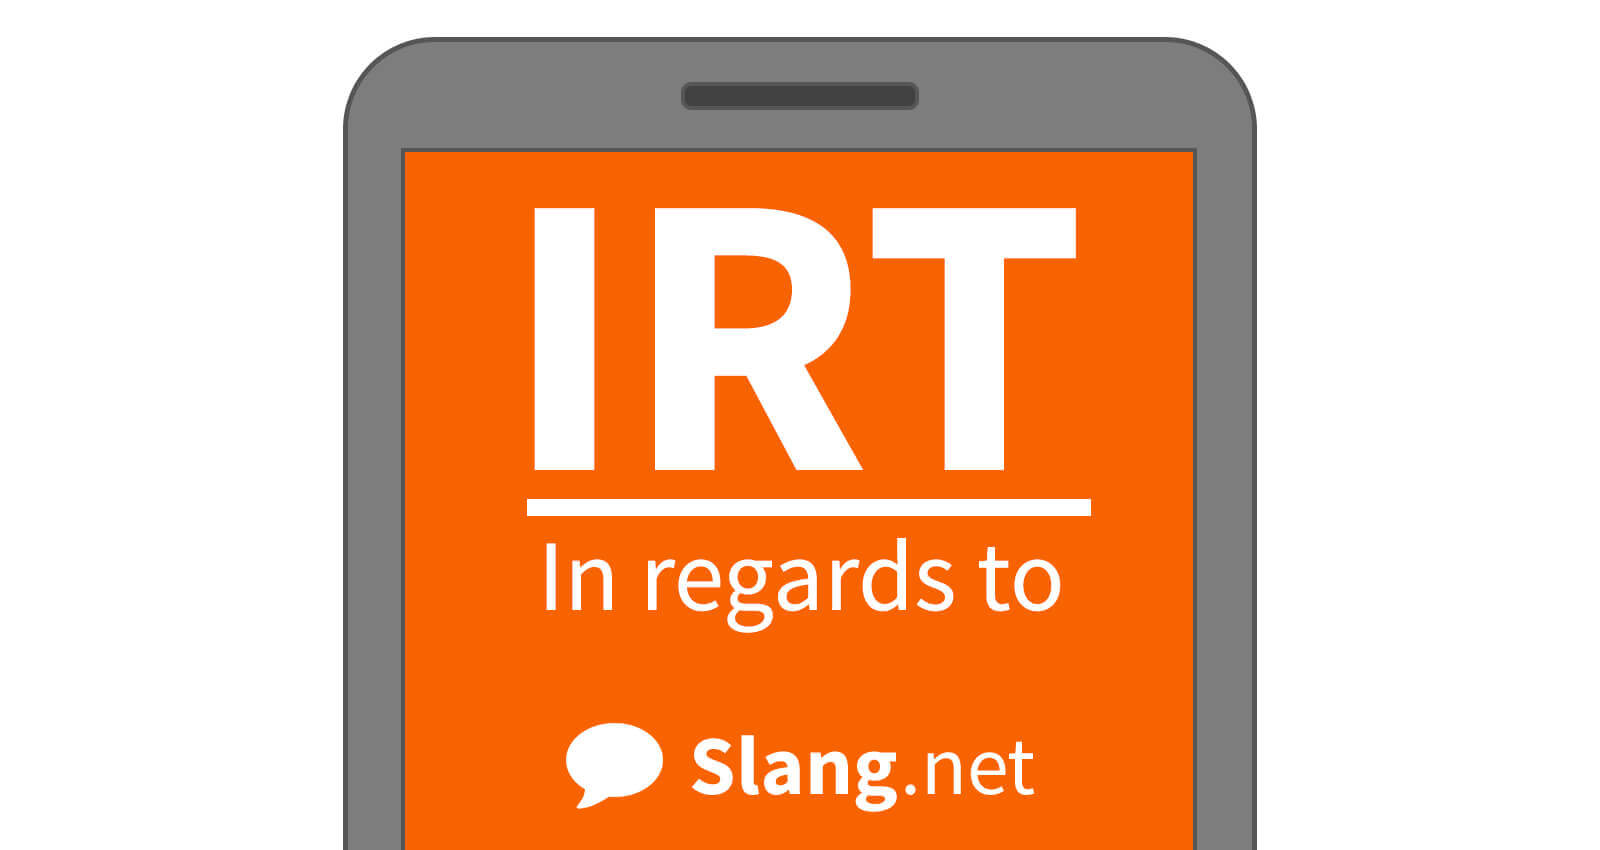 You will likely see IRT in emails and when messaging or online